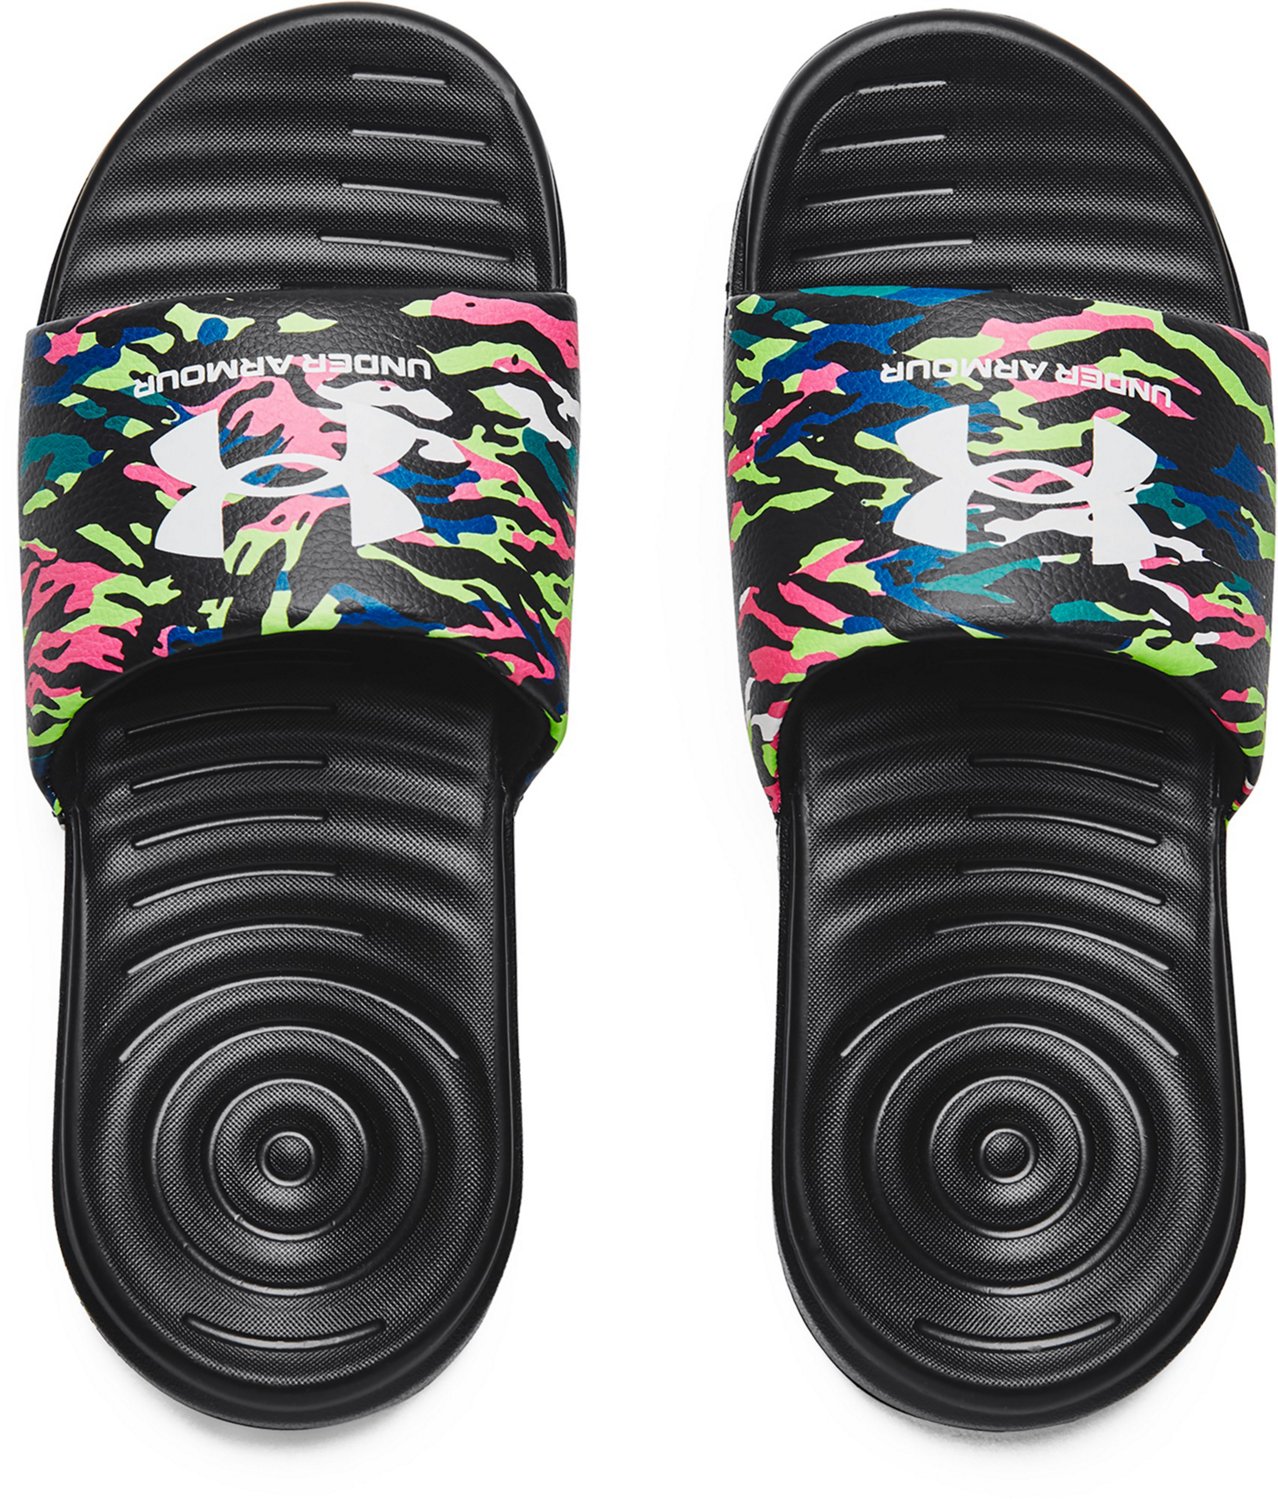 Under Armour Boys' Ansa Graphic Slides | Free Shipping at Academy